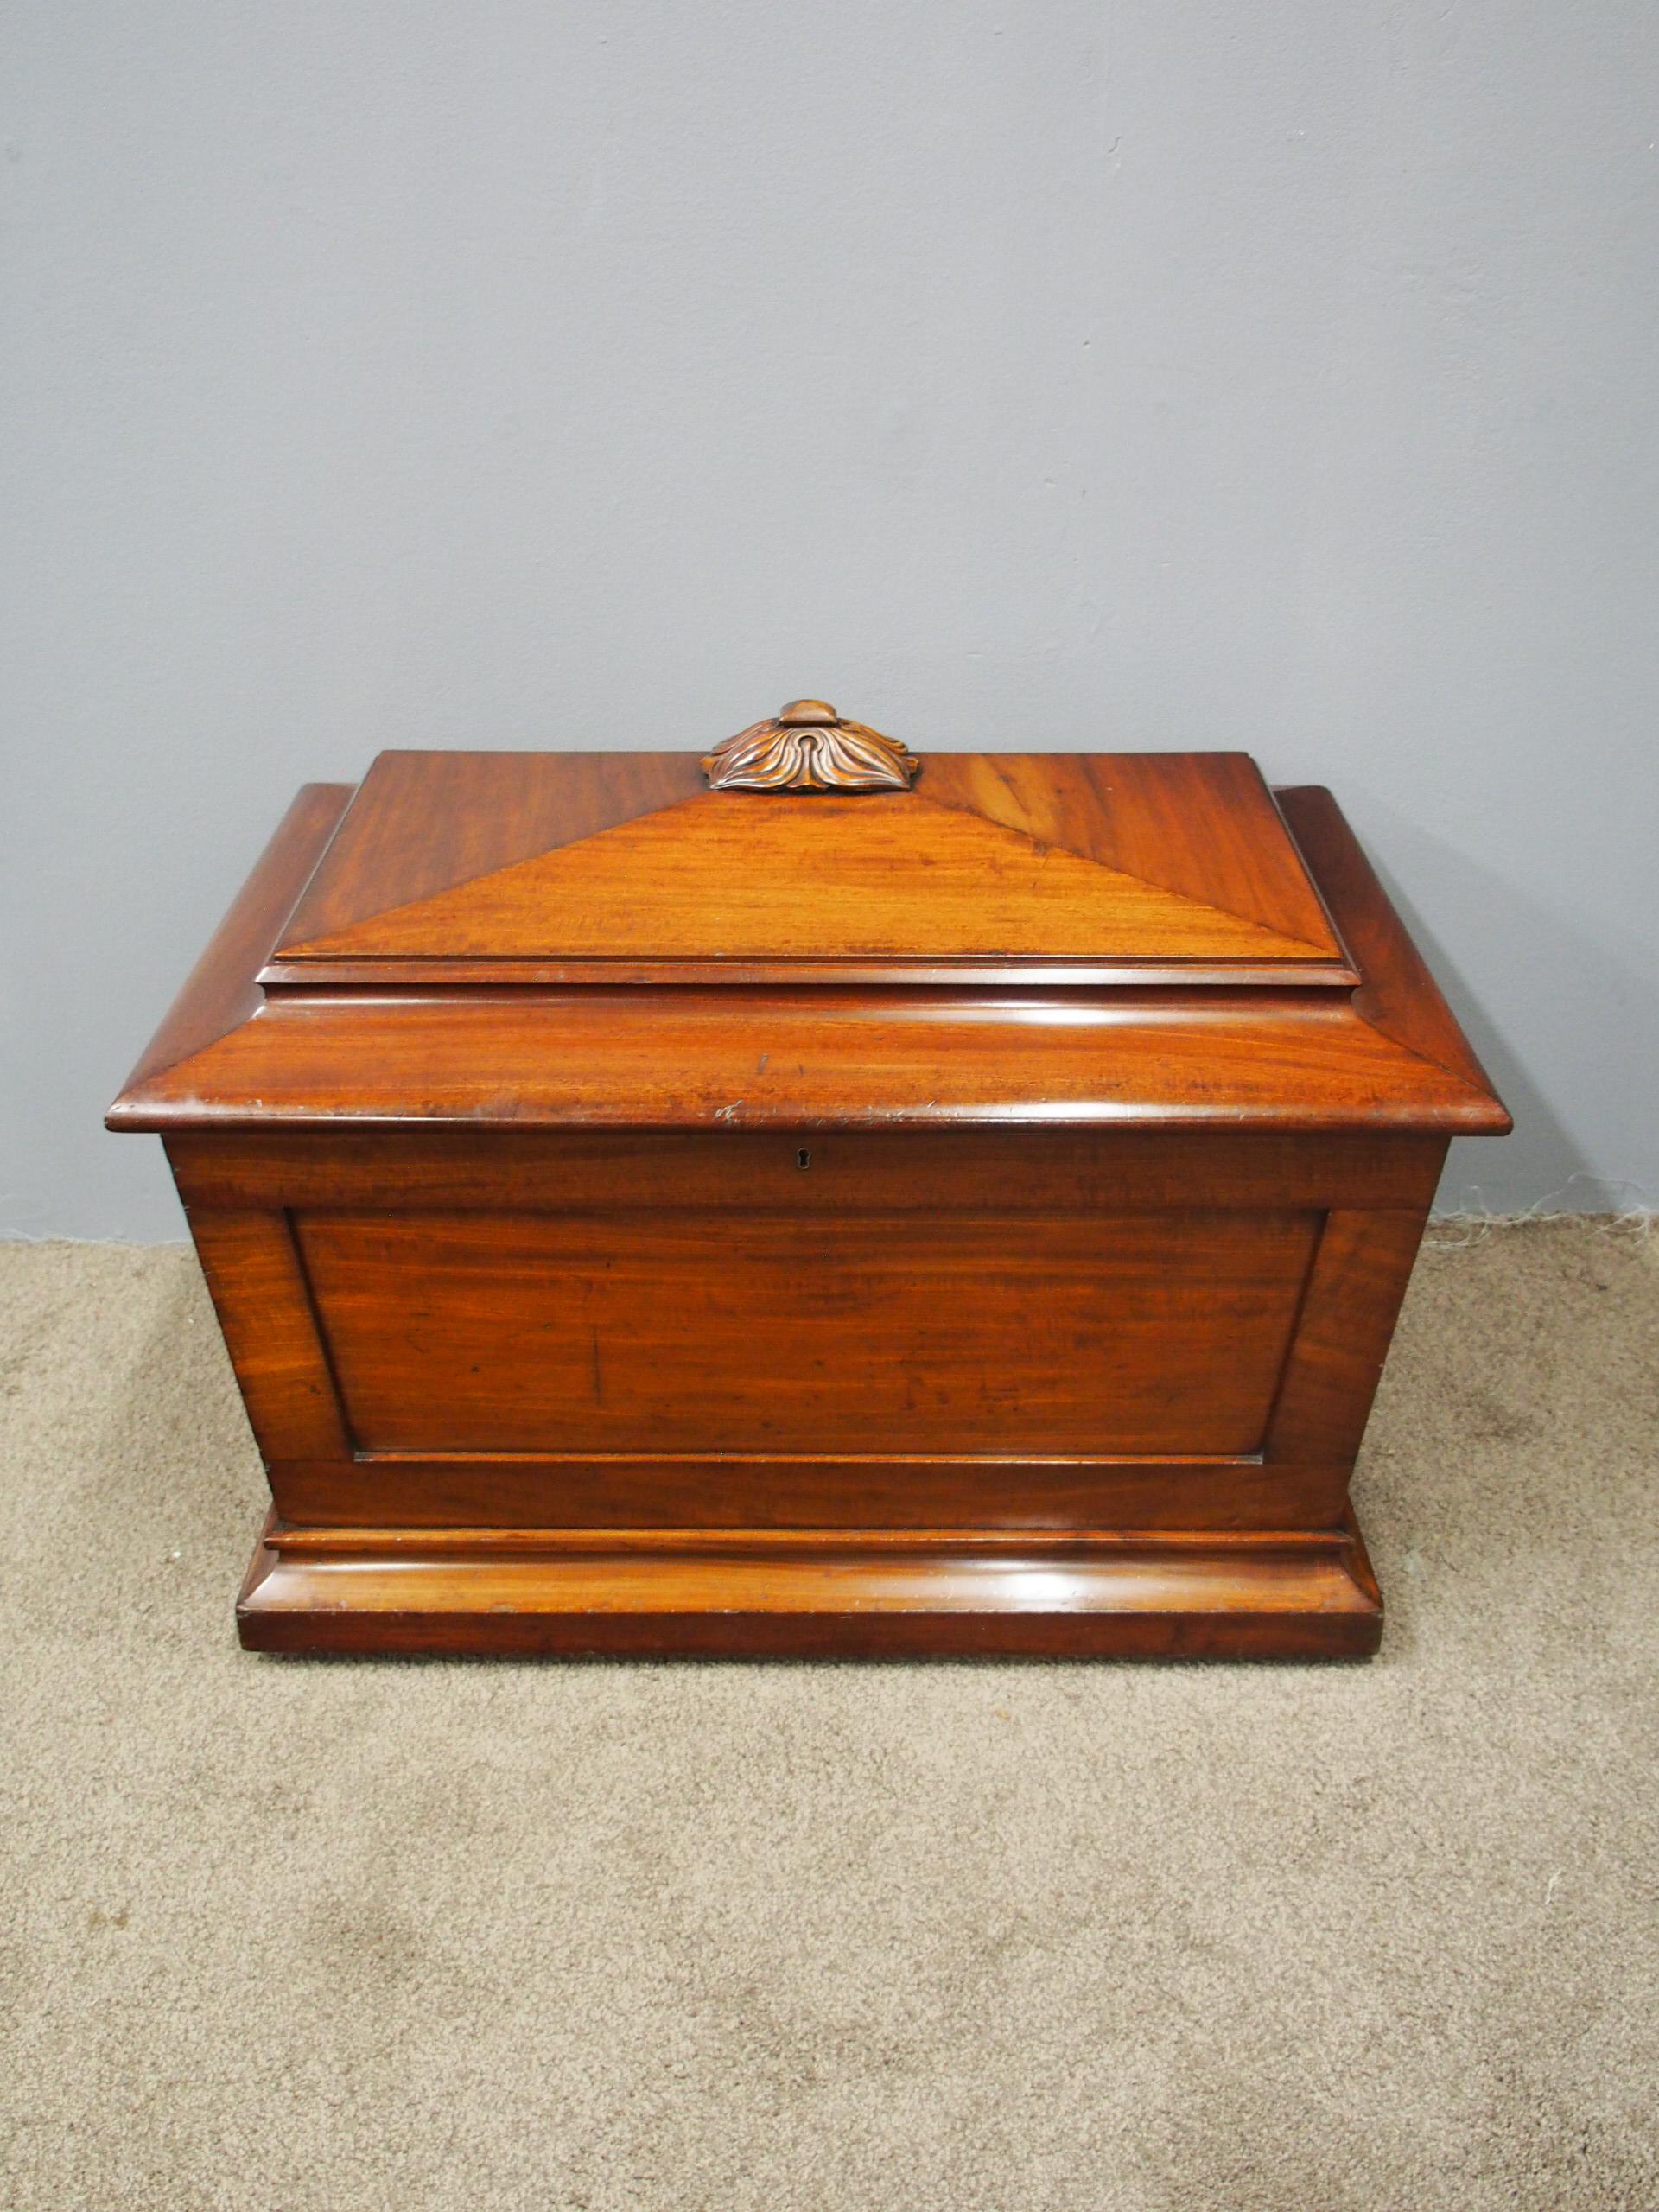 Large William IV mahogany cellarette, circa 1830. The pagoda shaped top with moulded edges, surmounted by an elaborate foliate carving. It has panelled sides with an original brass drainage tap to the rear. It has a moulded plinth base with hidden